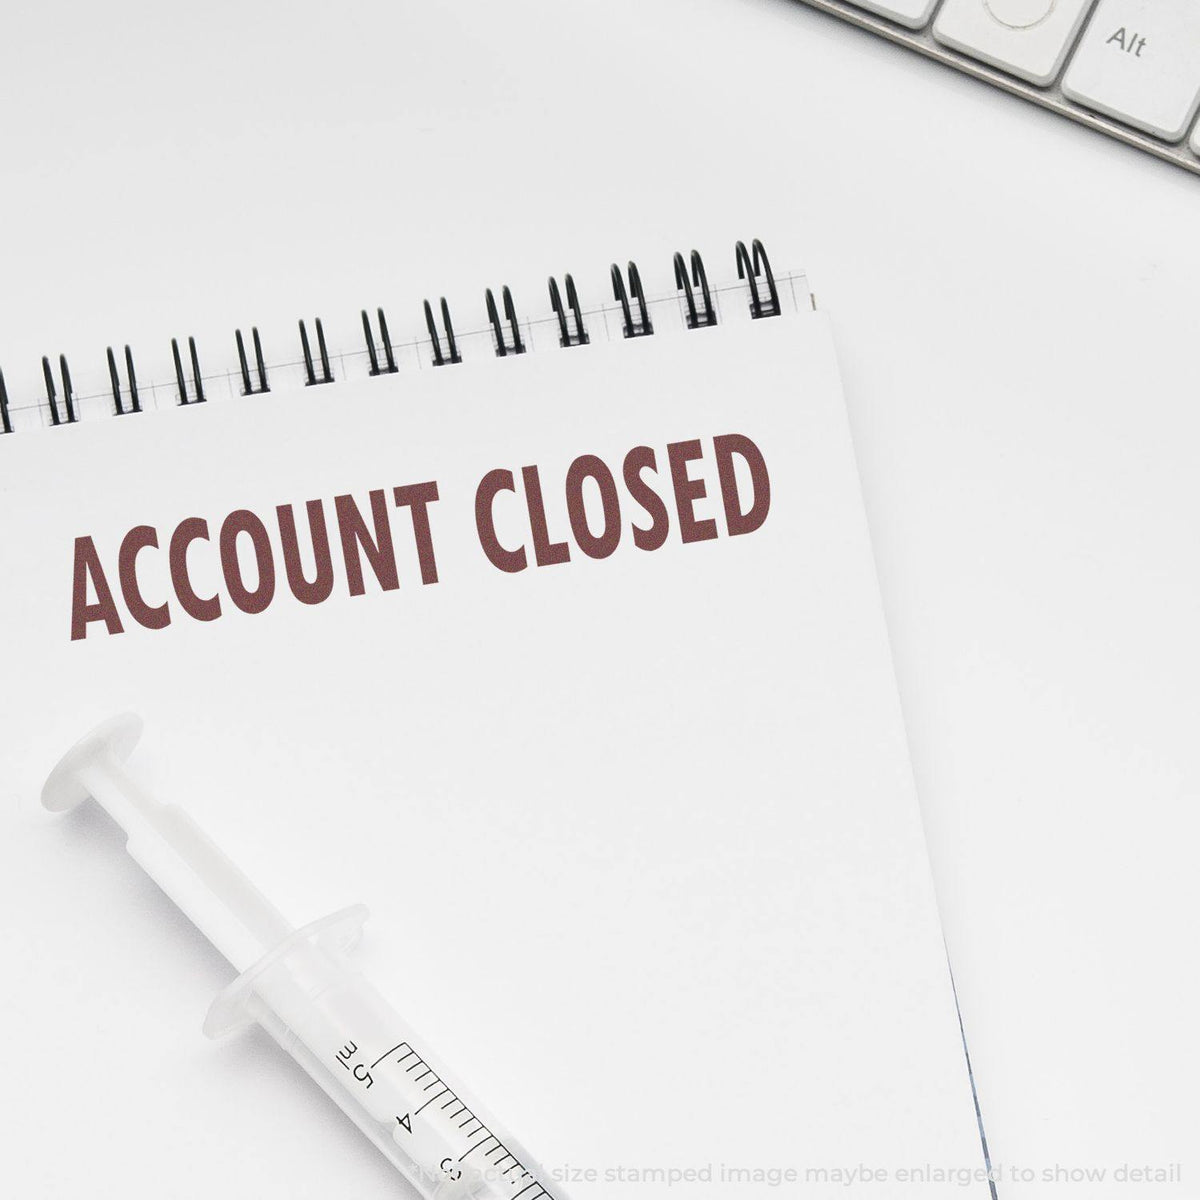 Large Self-Inking Account Closed Stamp image displaying &quot;ACCOUNT CLOSED&quot; message in large font on a notepad.